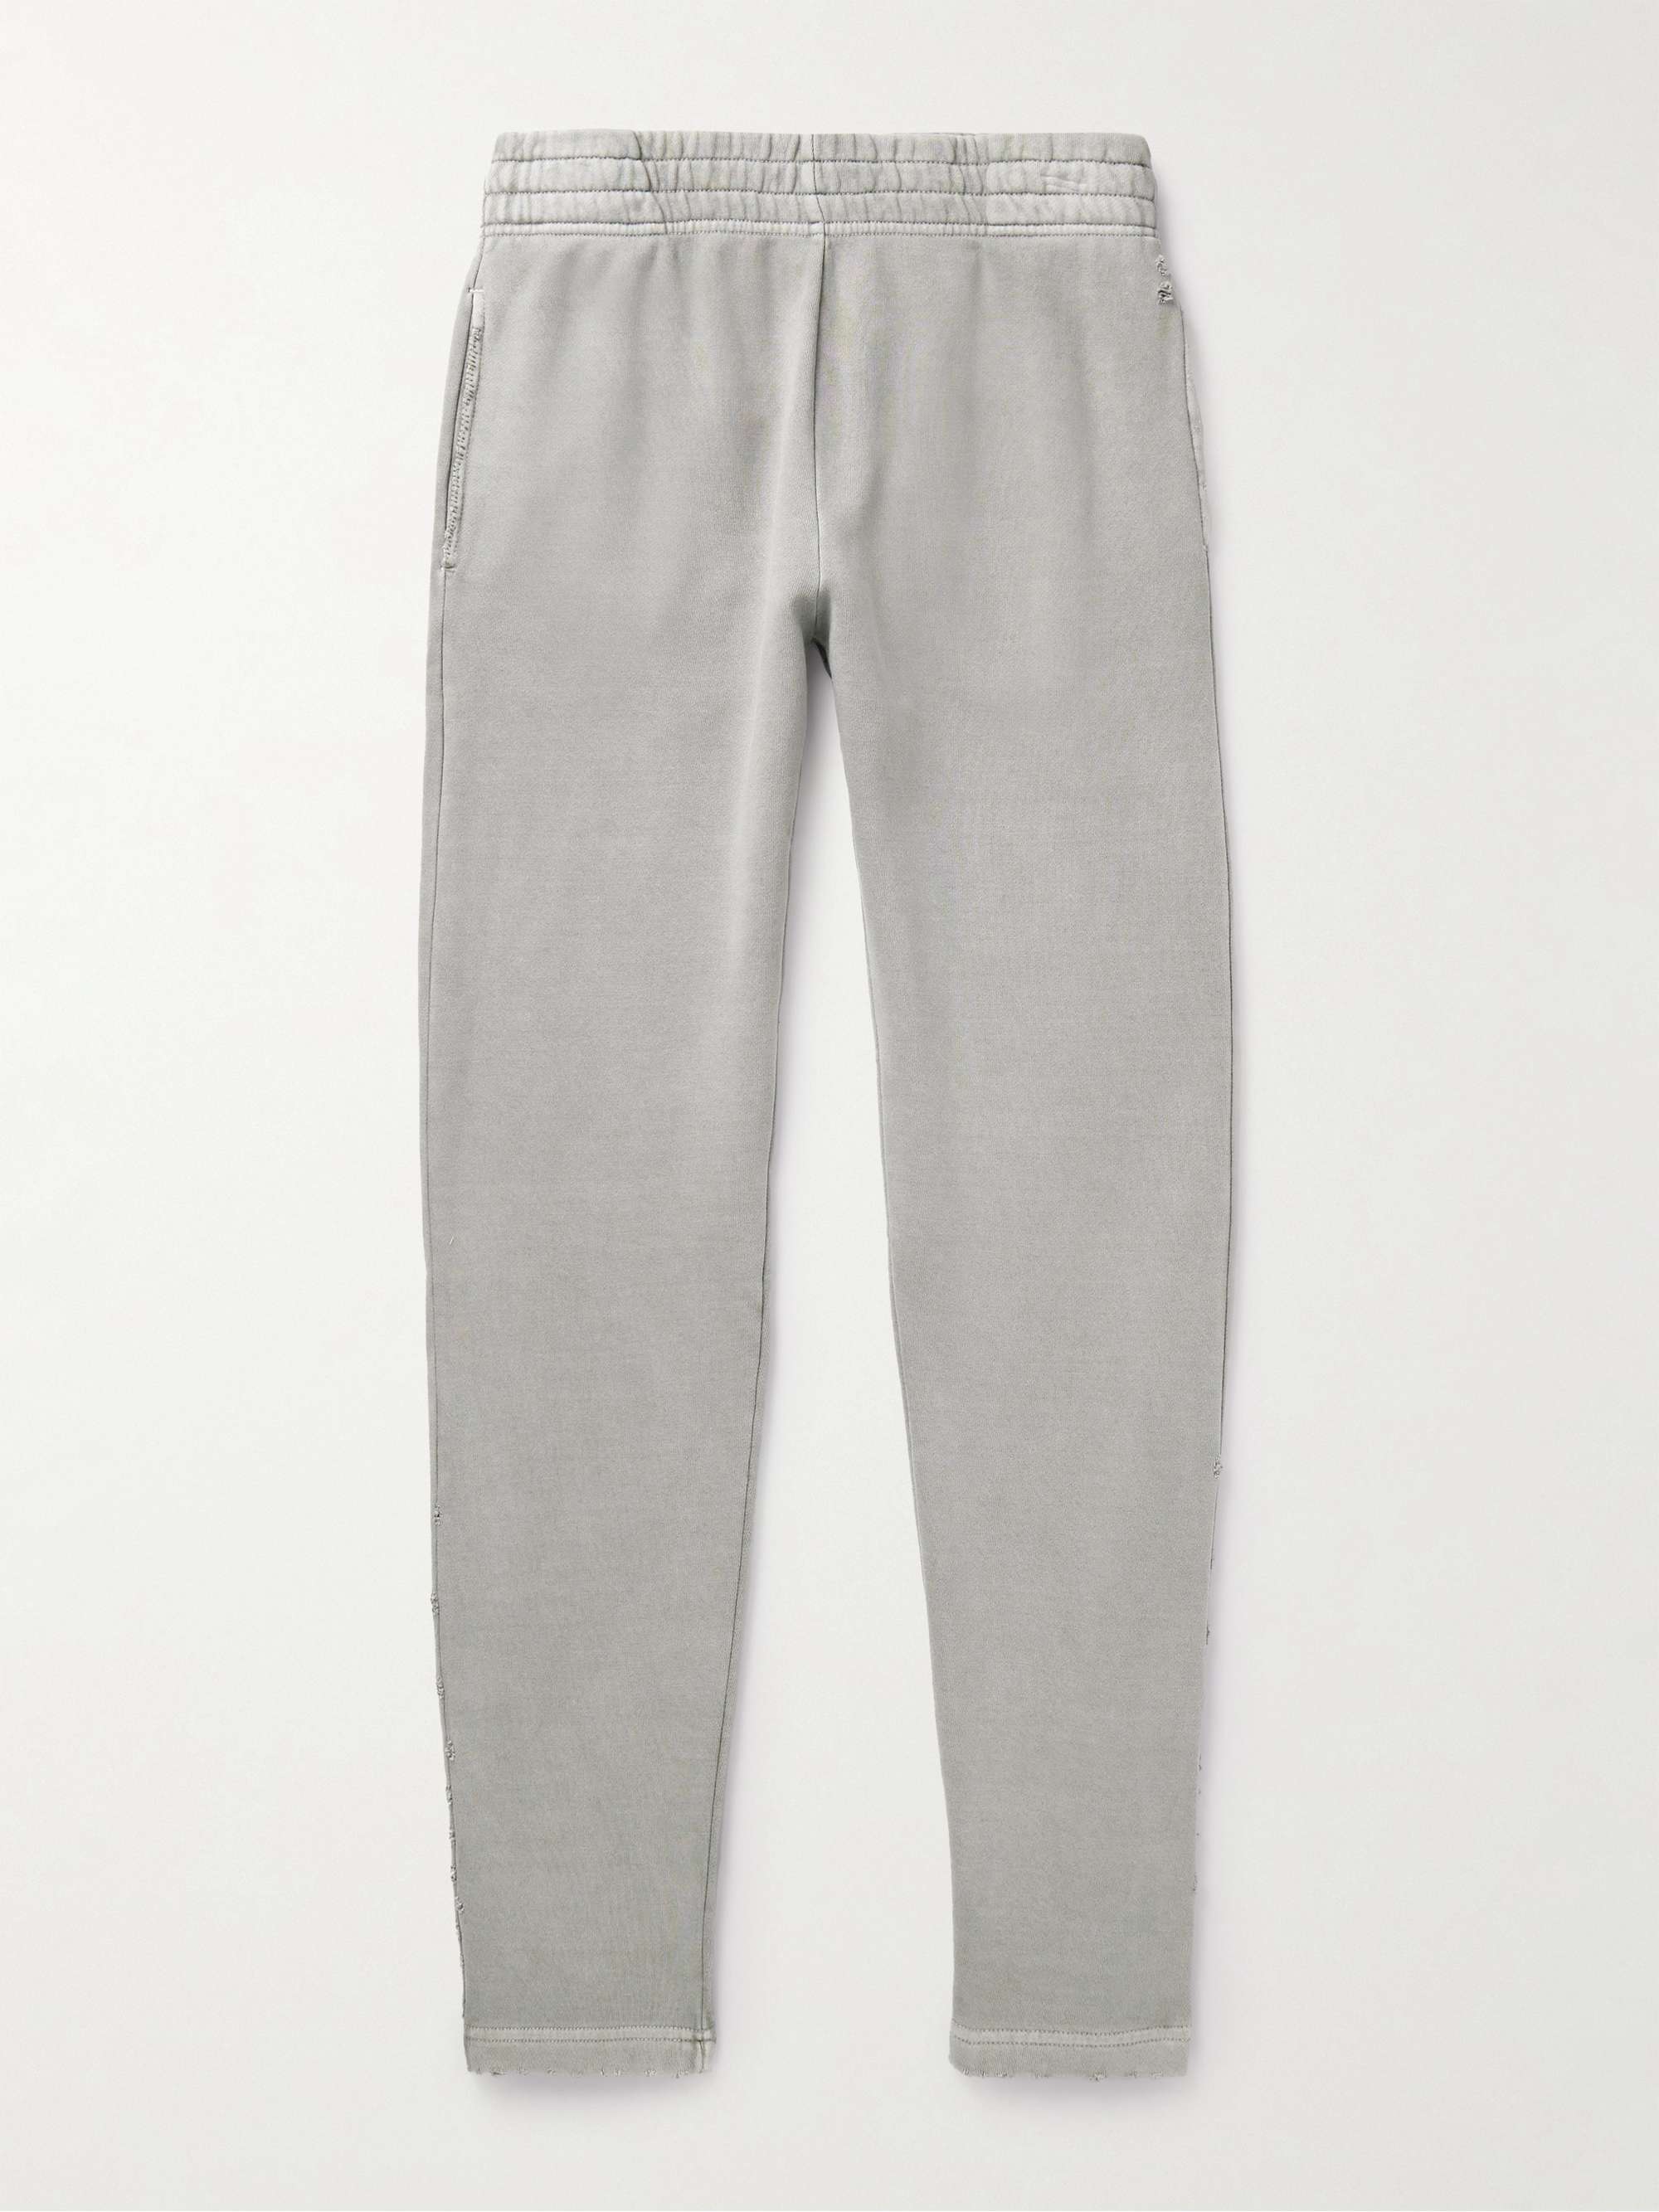 Folsom Tapered Distressed Cotton-Jersey Sweatpants